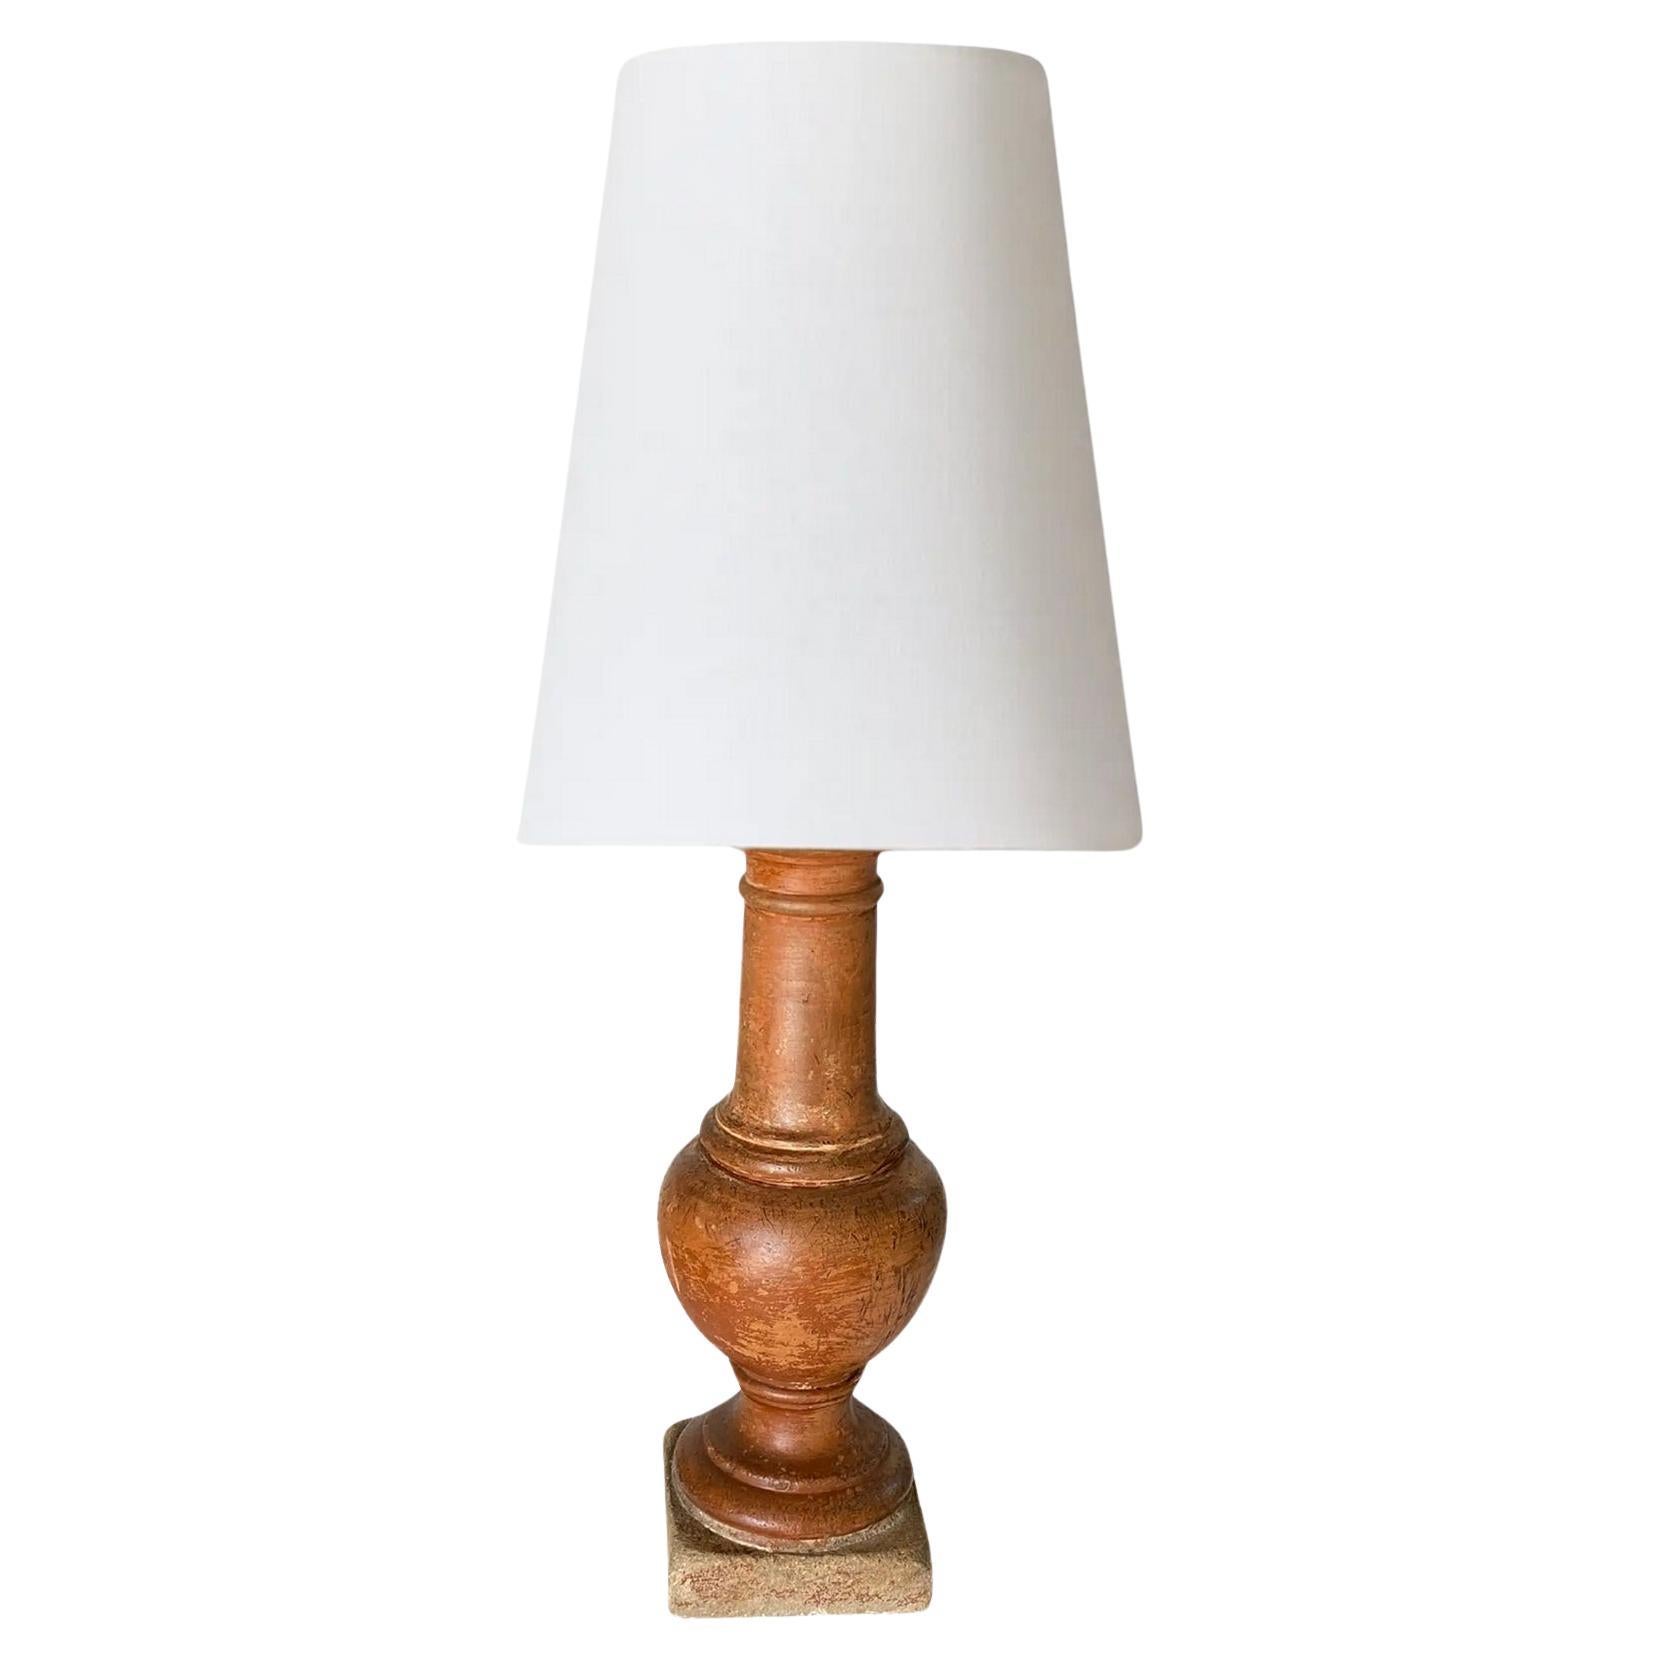 Tall French Neoclassical Terracotta Baluster Lamp, Brown Color, 19th Century For Sale 1